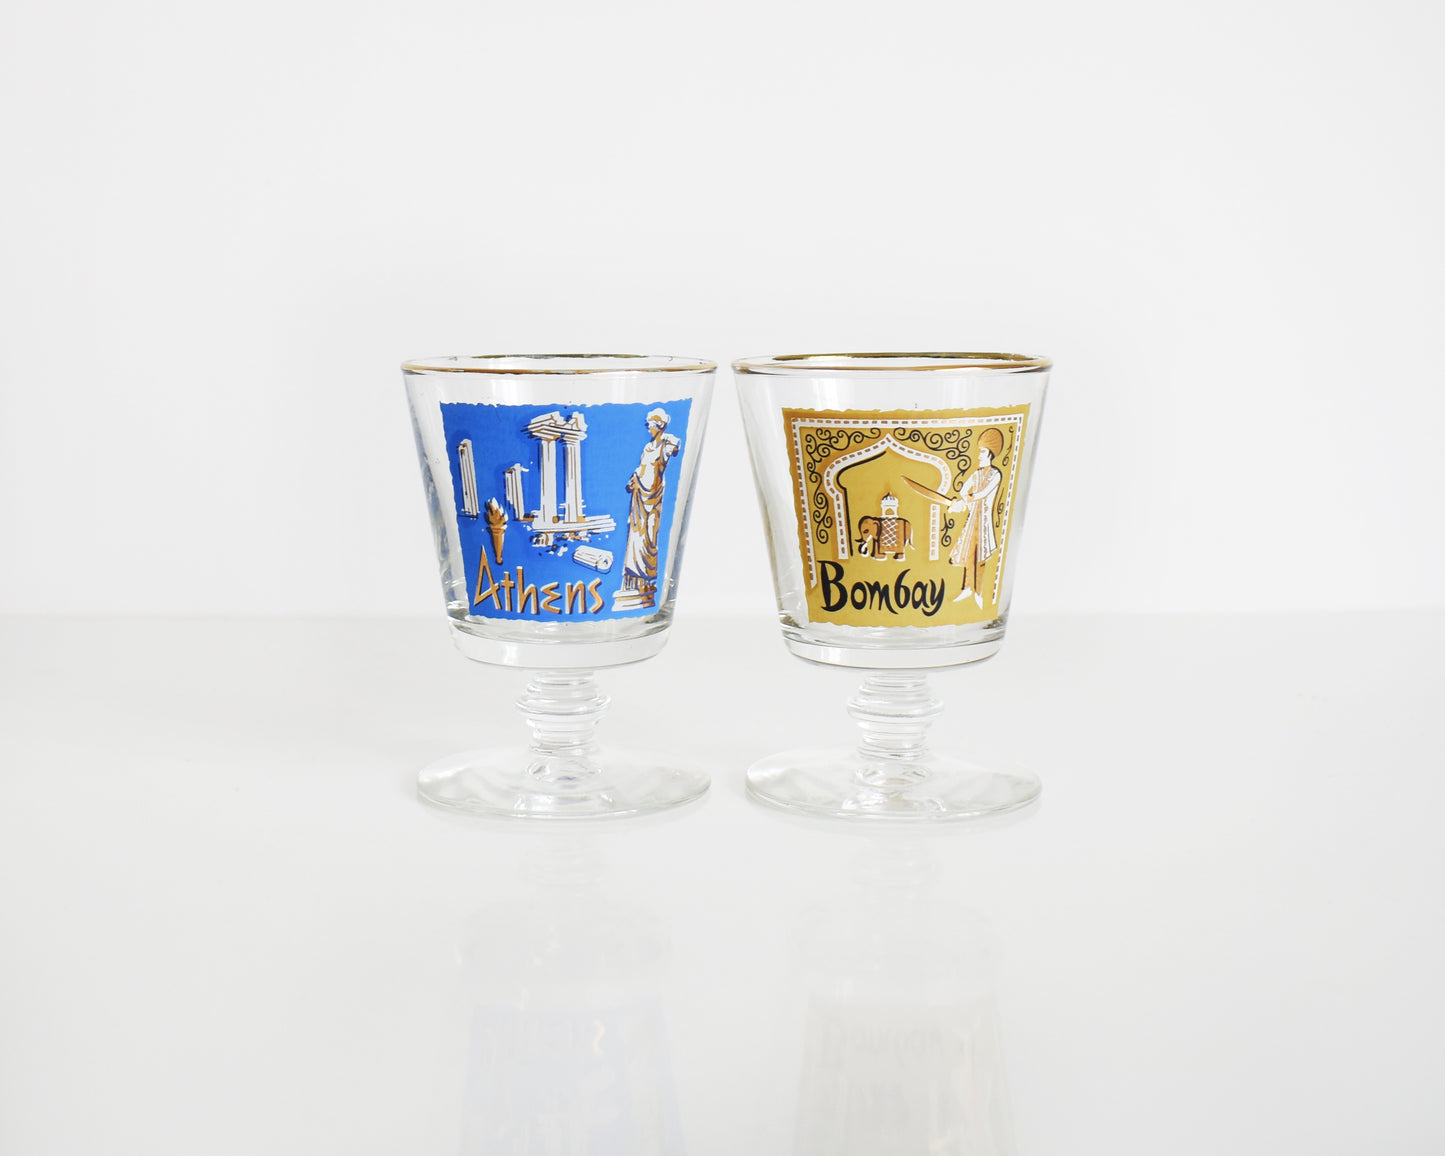 The Athens and Bombay glasses